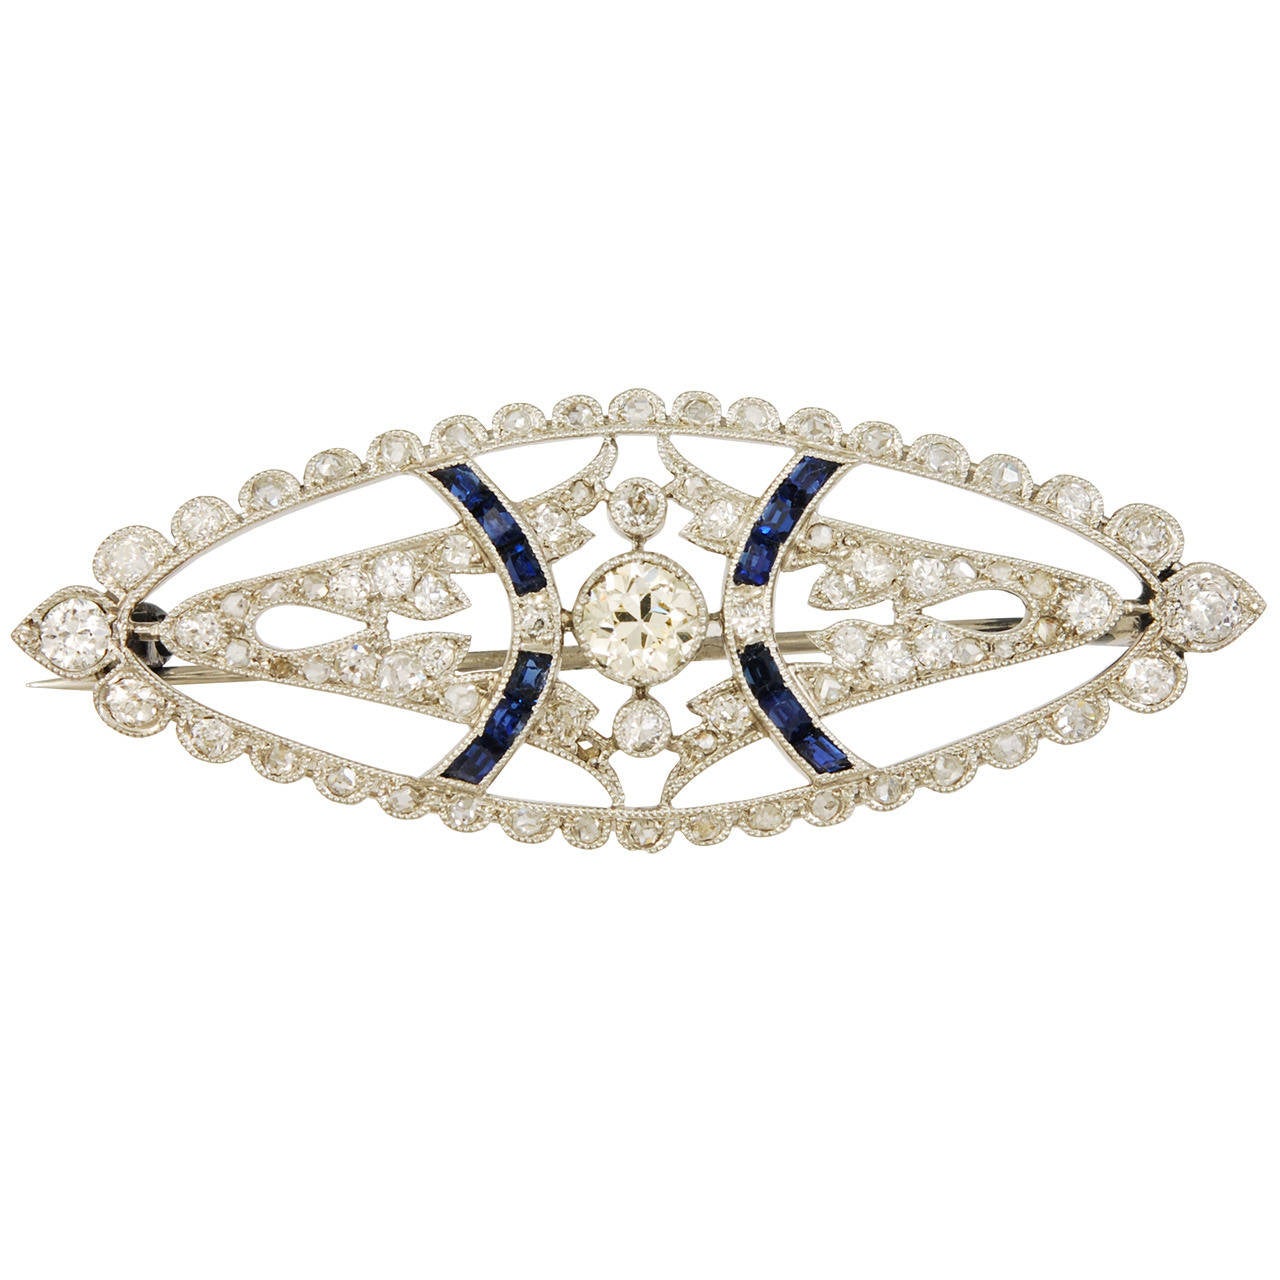 Antique French Sapphire Diamond Platinum Brooch For Sale at 1stdibs